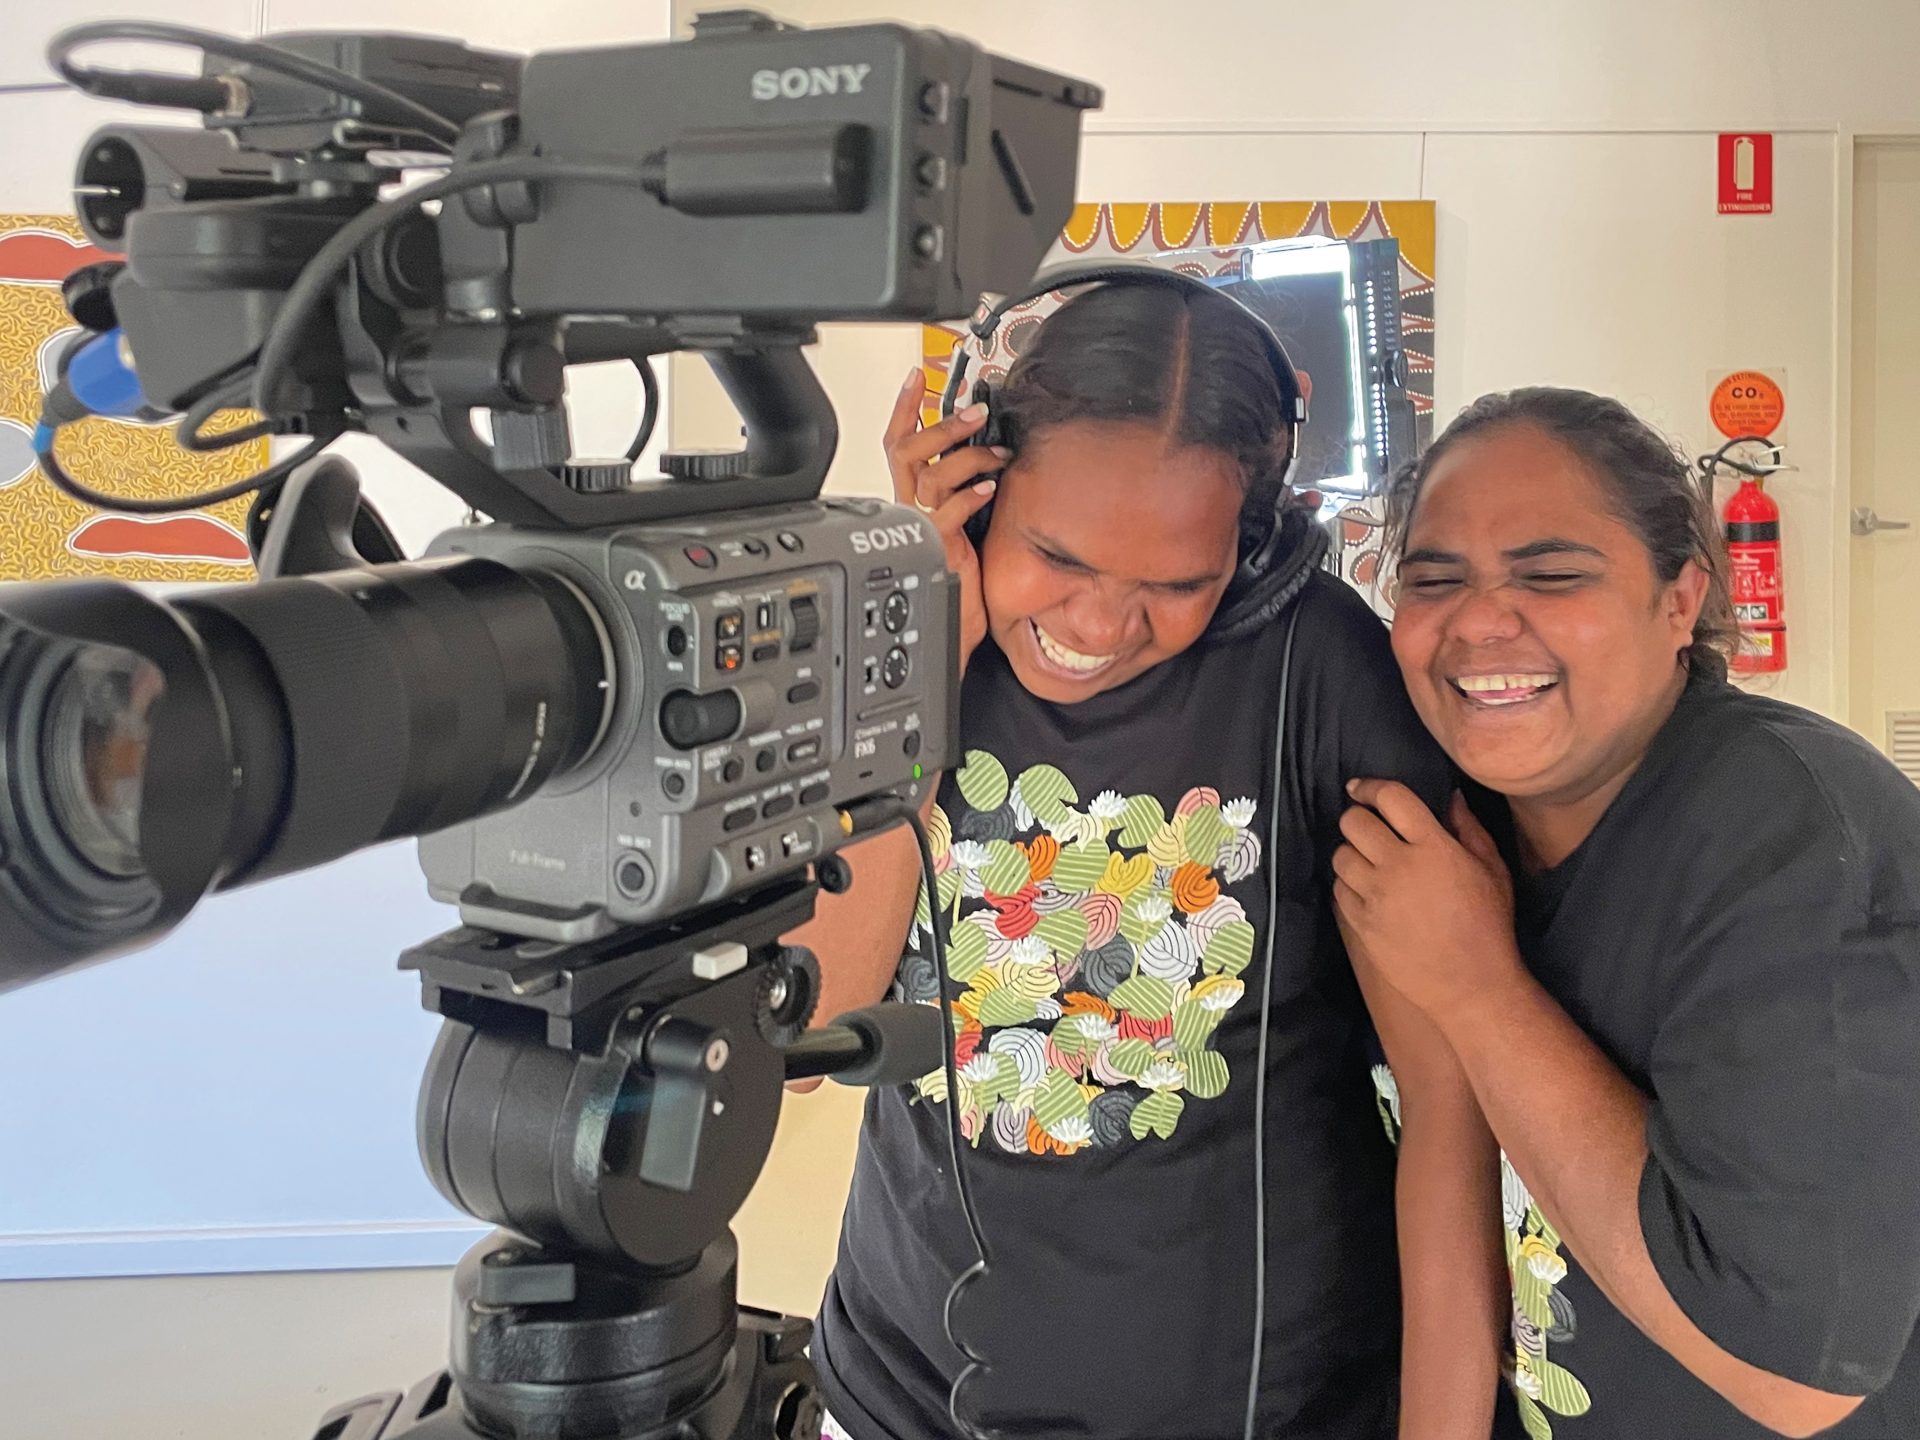 Behind the scenes for WA Museum Digital Art Project, Cathy Ward (left) and Delaney Griffiths (right), Waringarri Aboriginal Arts, Miriwoong Country, Kununarra, WA, 2022. Image courtesy of Sohan Ariel Hayes & Devris Hasan.